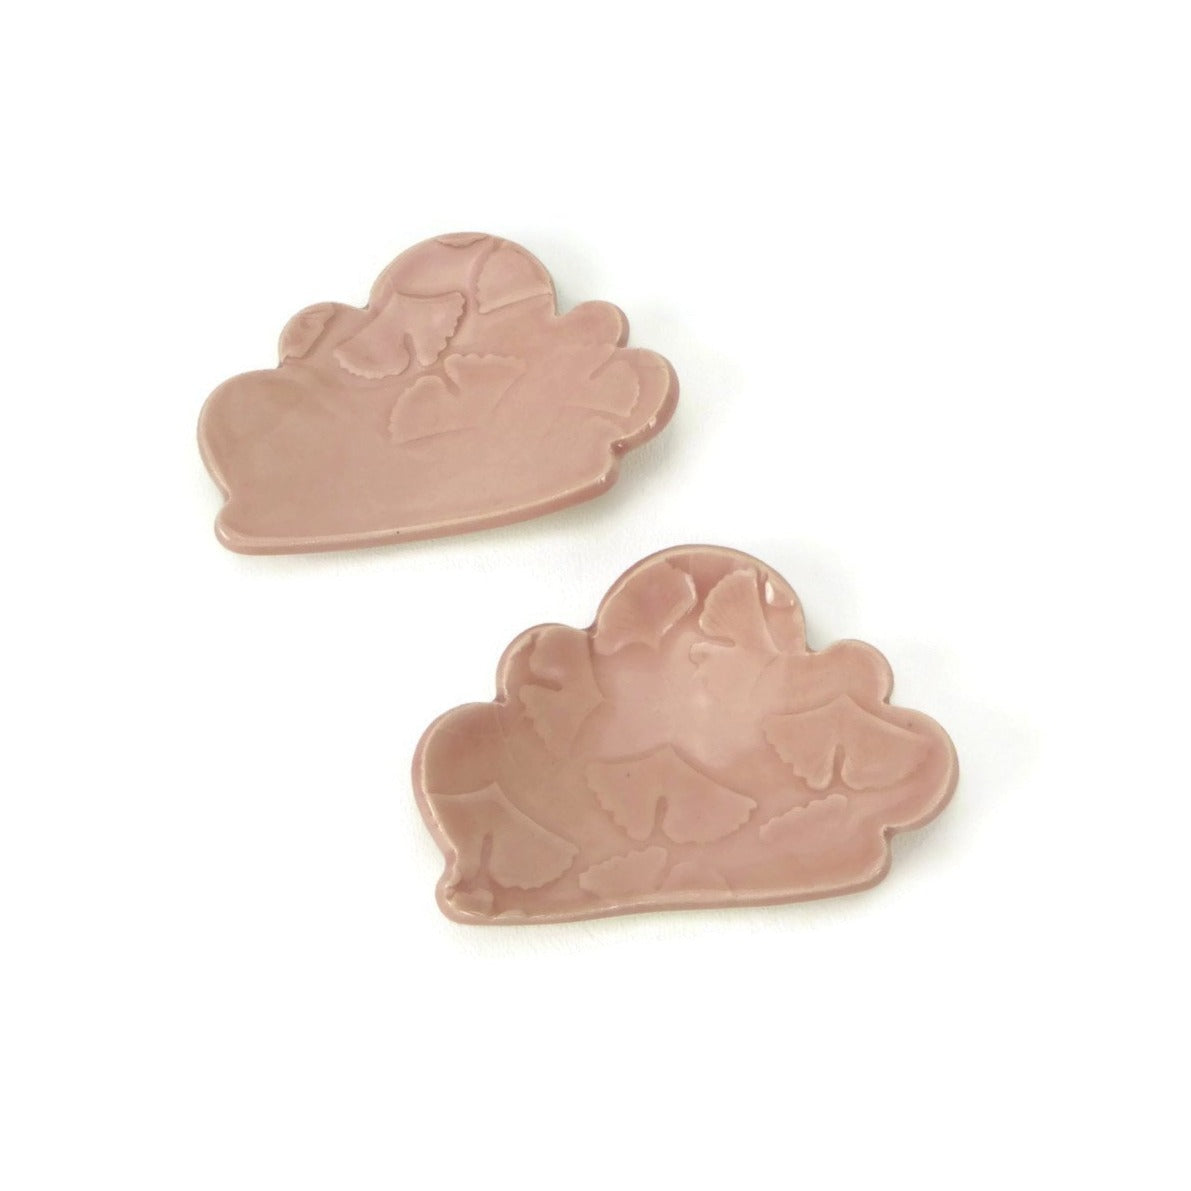 Cherry Blossom Cloud Shaped Trivet with Ginkgo Patterning